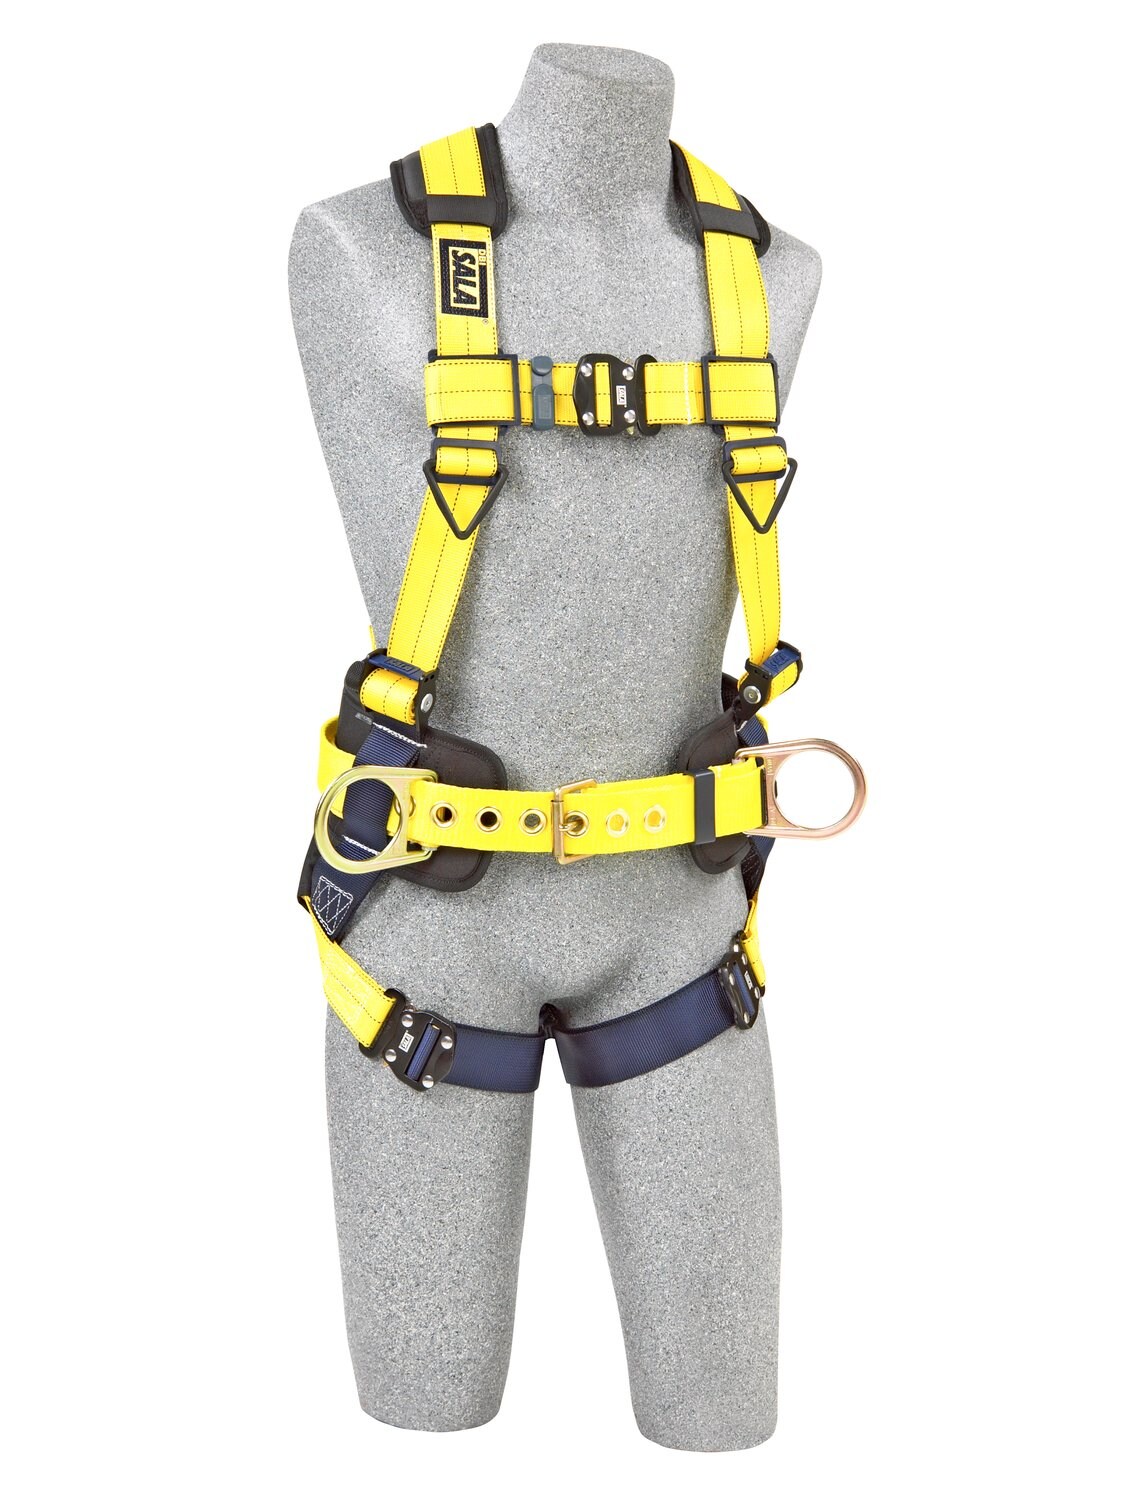 7012815706 - 3M DBI-SALA Delta Construction Positioning Safety Harness 1110577, Large